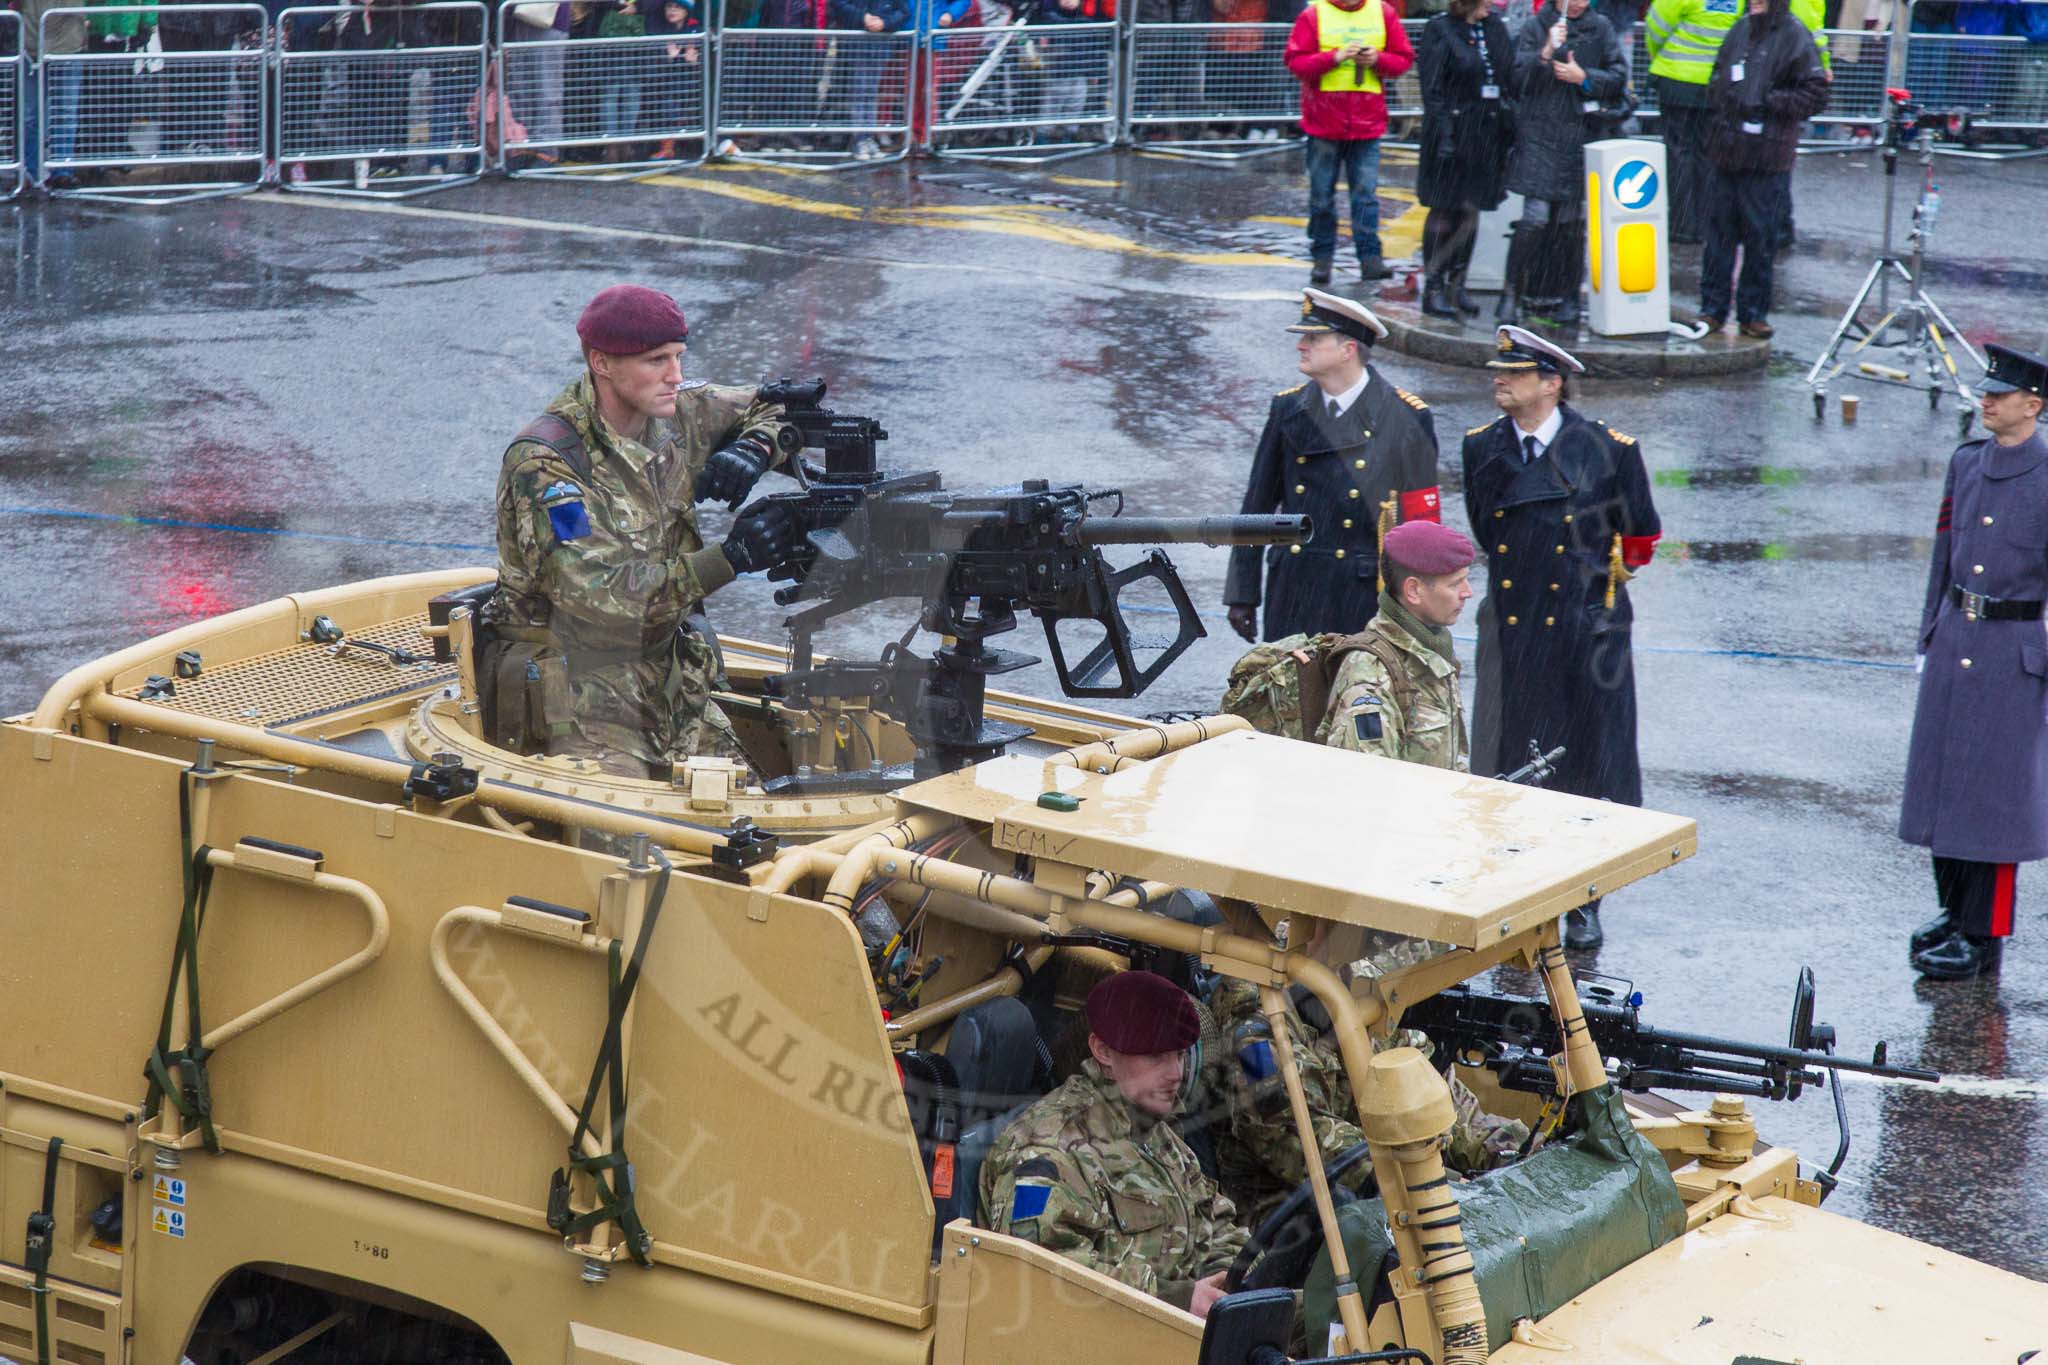 Lord Mayor's Show 2013: 30- B Company, 4th Battalion The Parachute Regiment-based in White City and known as 'London's Paras'..
Press stand opposite Mansion House, City of London,
London,
Greater London,
United Kingdom,
on 09 November 2013 at 11:15, image #400